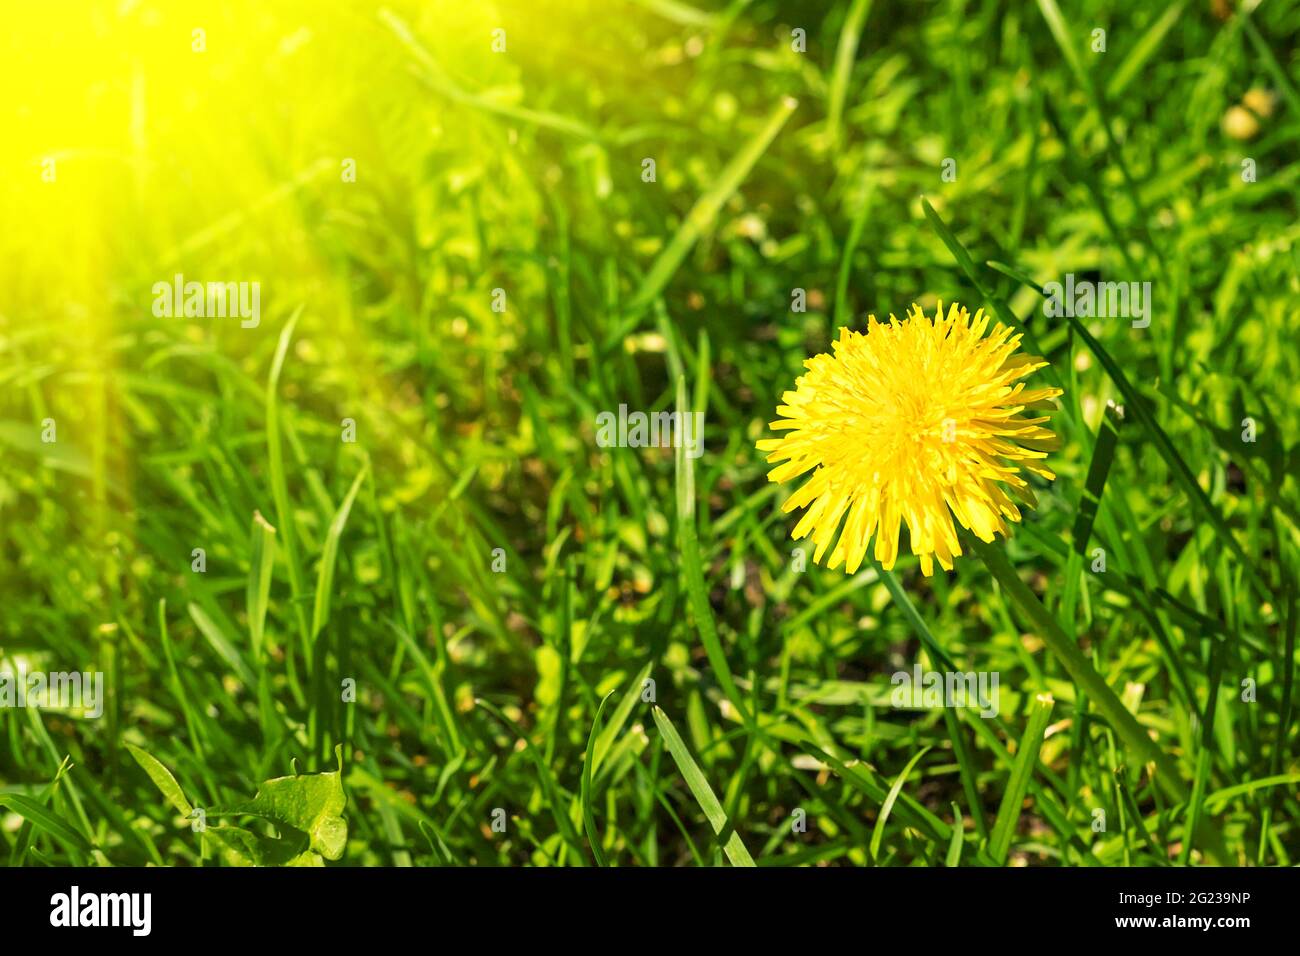 Yellow dandelion flower on green grass. natural background with sun beam Stock Photo